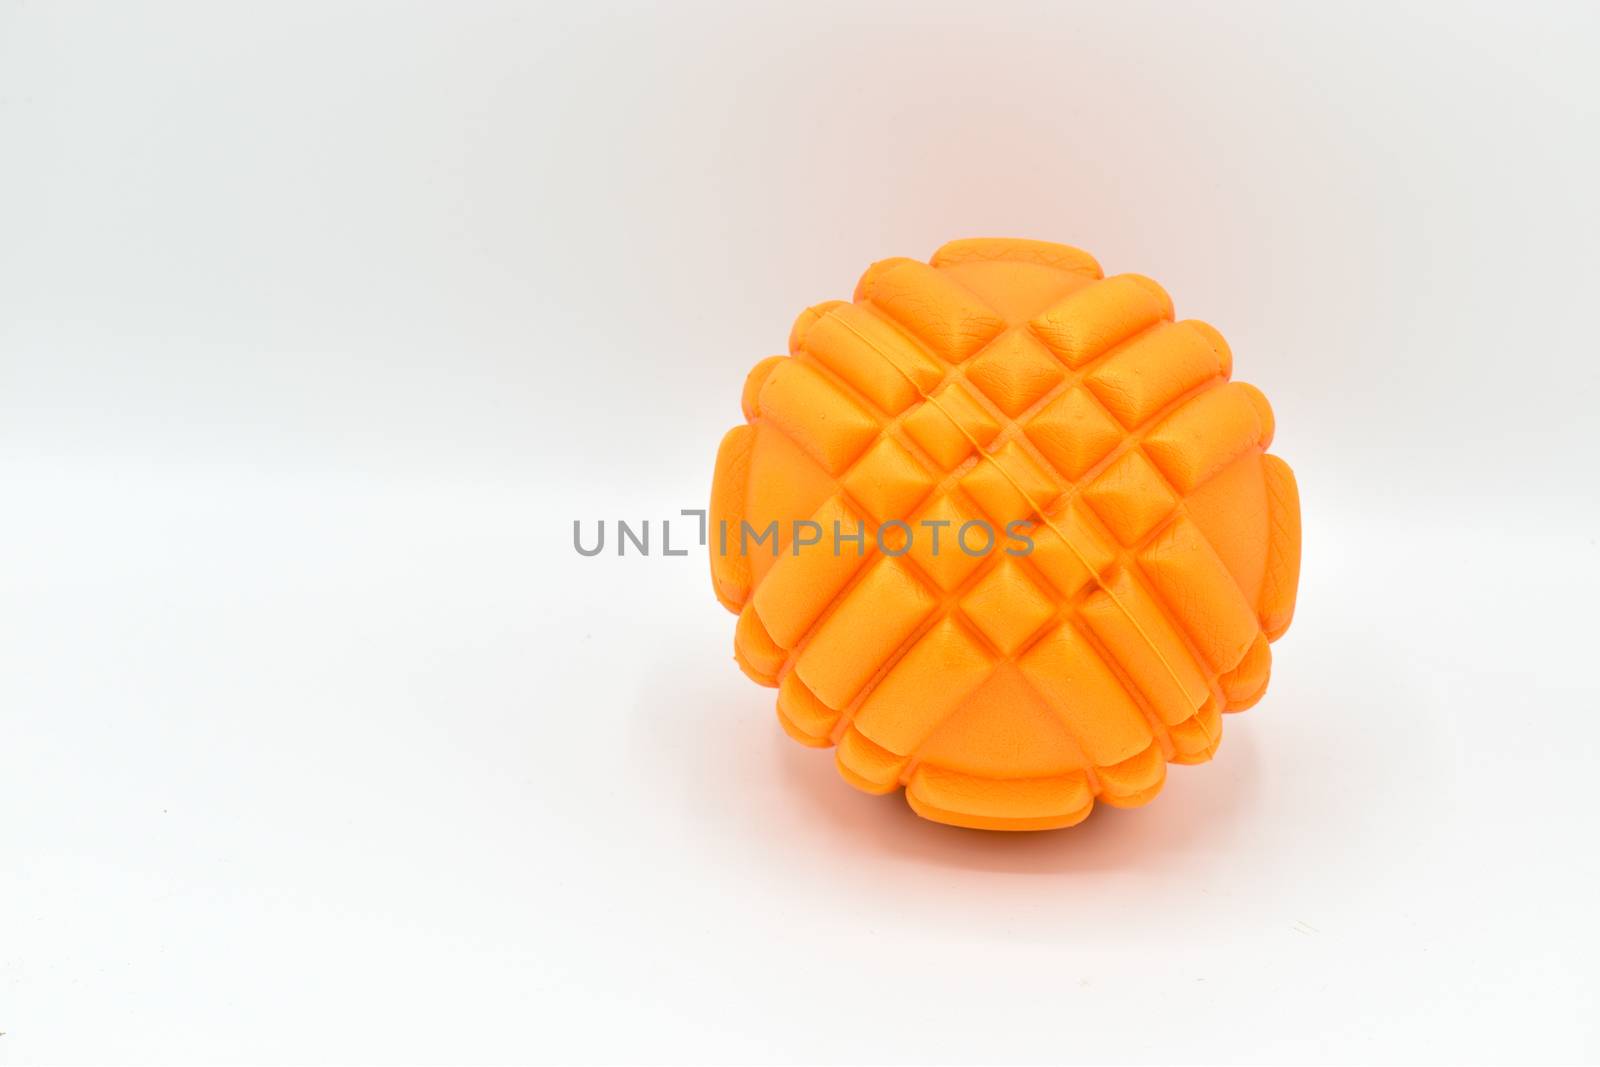 Foam roller ball isolated on white background by benentaylor